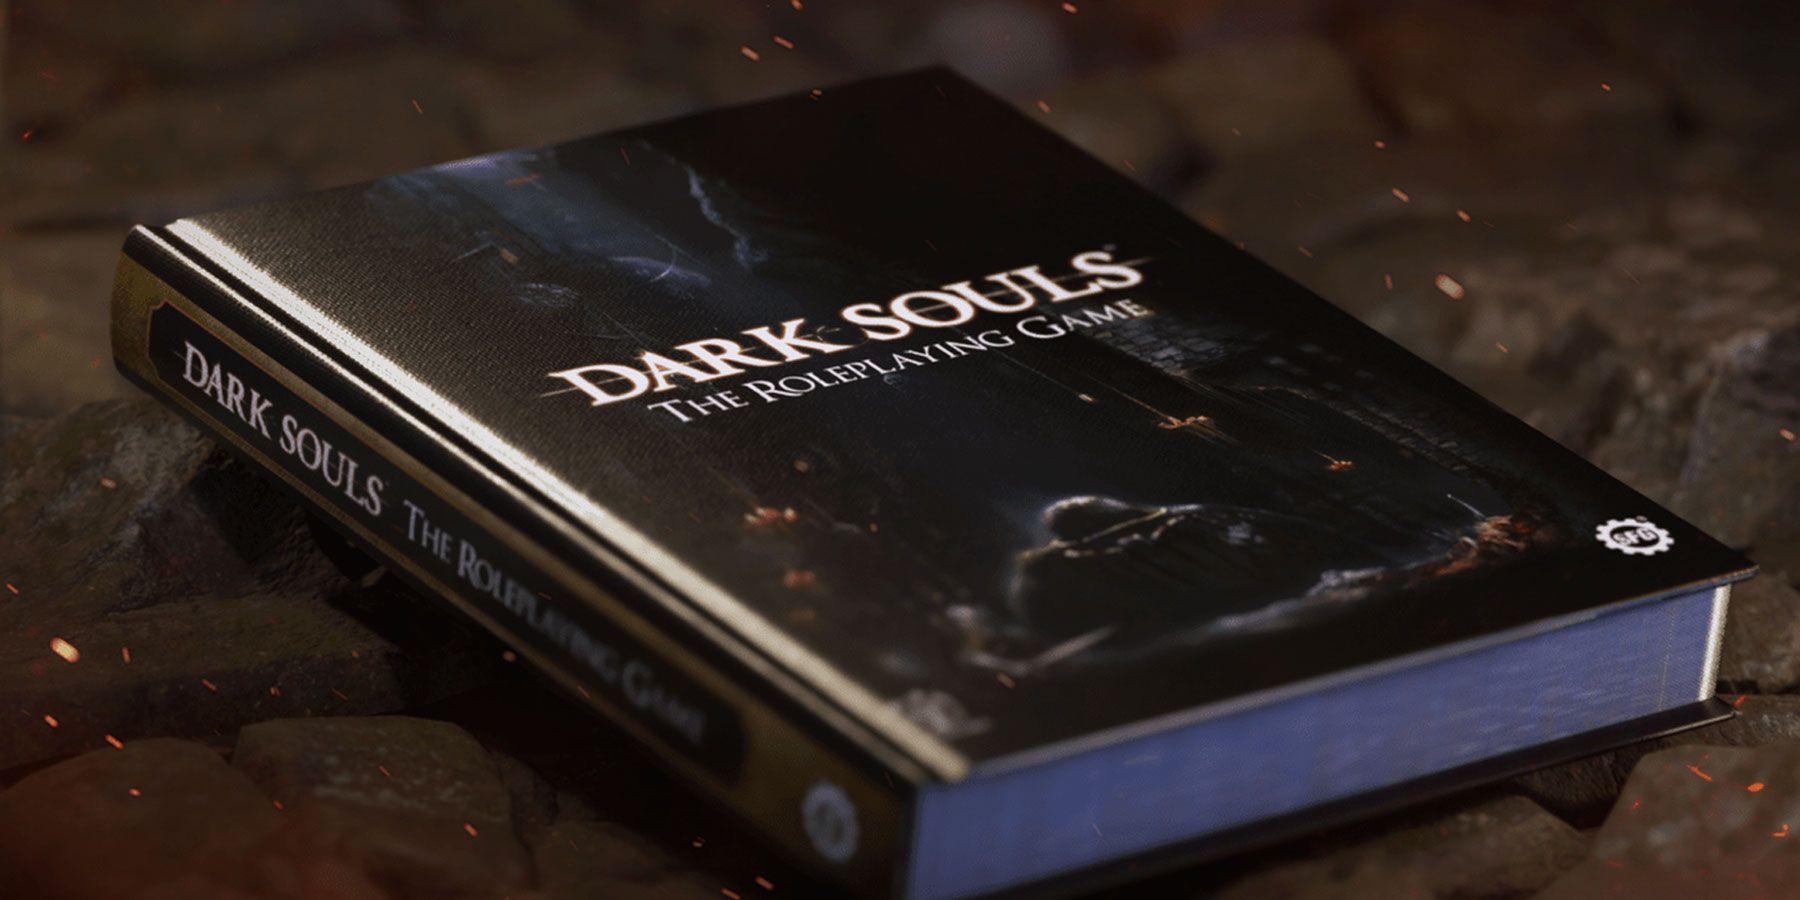 Dark-Souls-the-Roleplaying-Game-hardcover-book-on-stone-ground